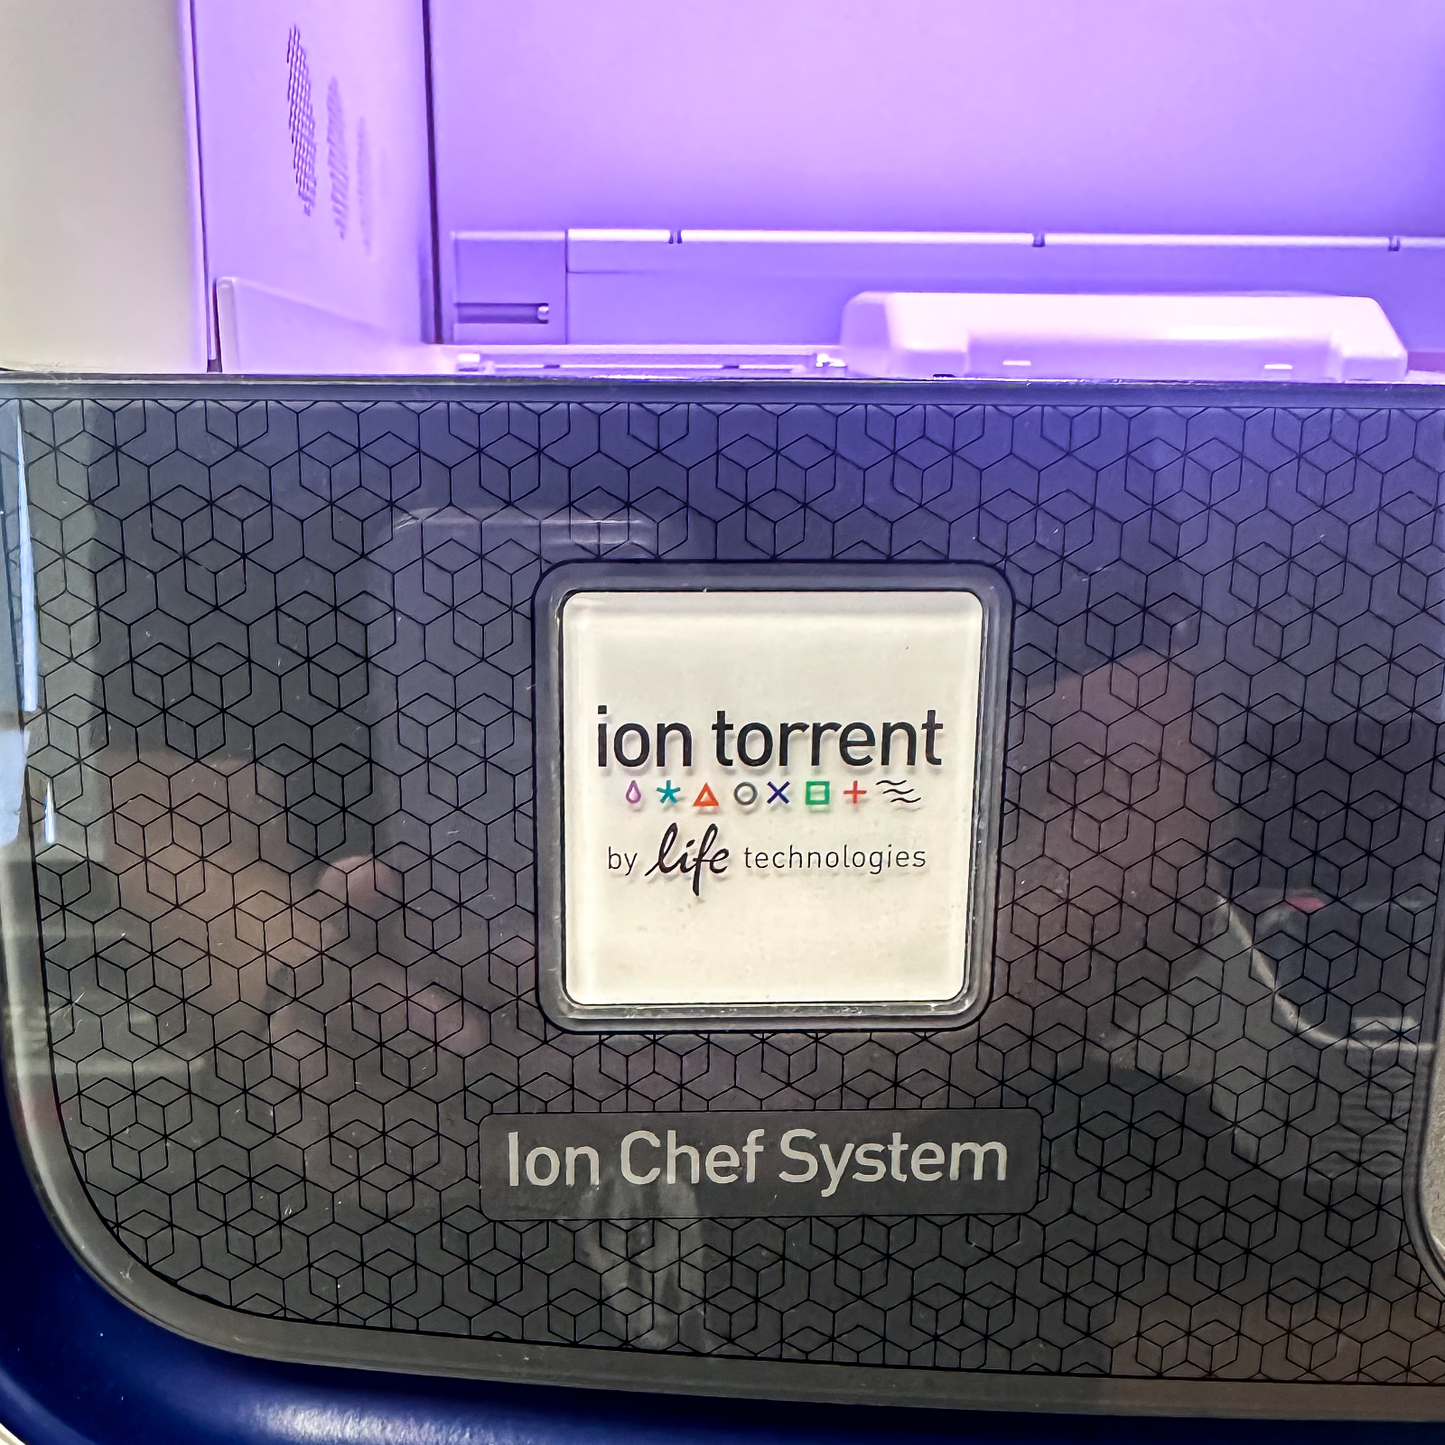 Thermo Fisher Ion GeneStudio S5 Ion Torrent Ion Chef System Model 4247 DOM 2018